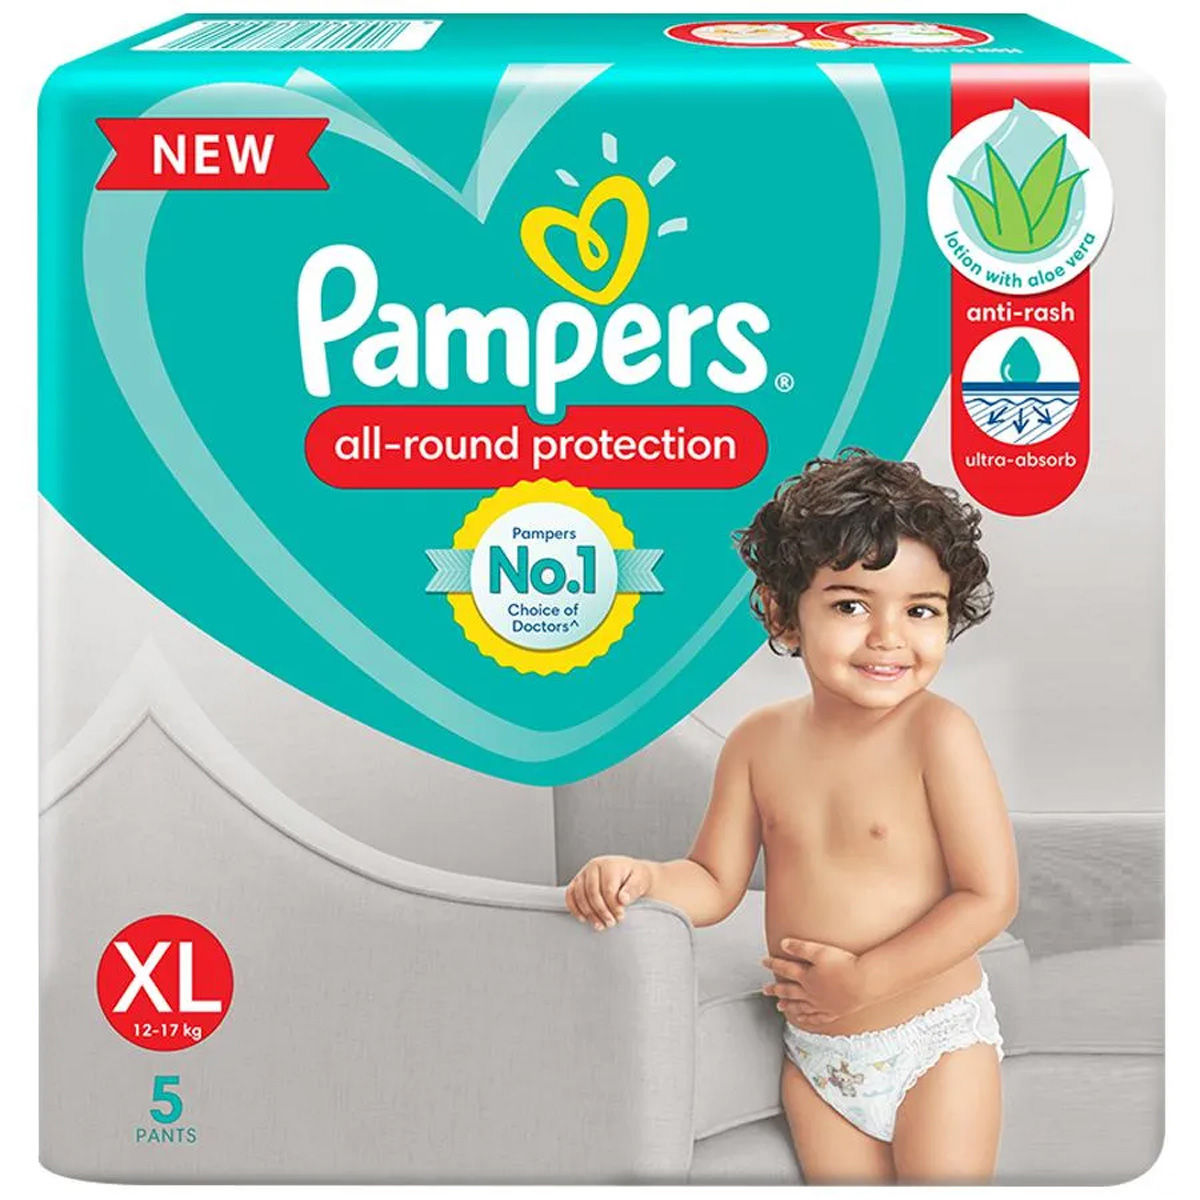 Pampers All- Round Protection Diaper Pants XL, 5 Count, Pack of 1 